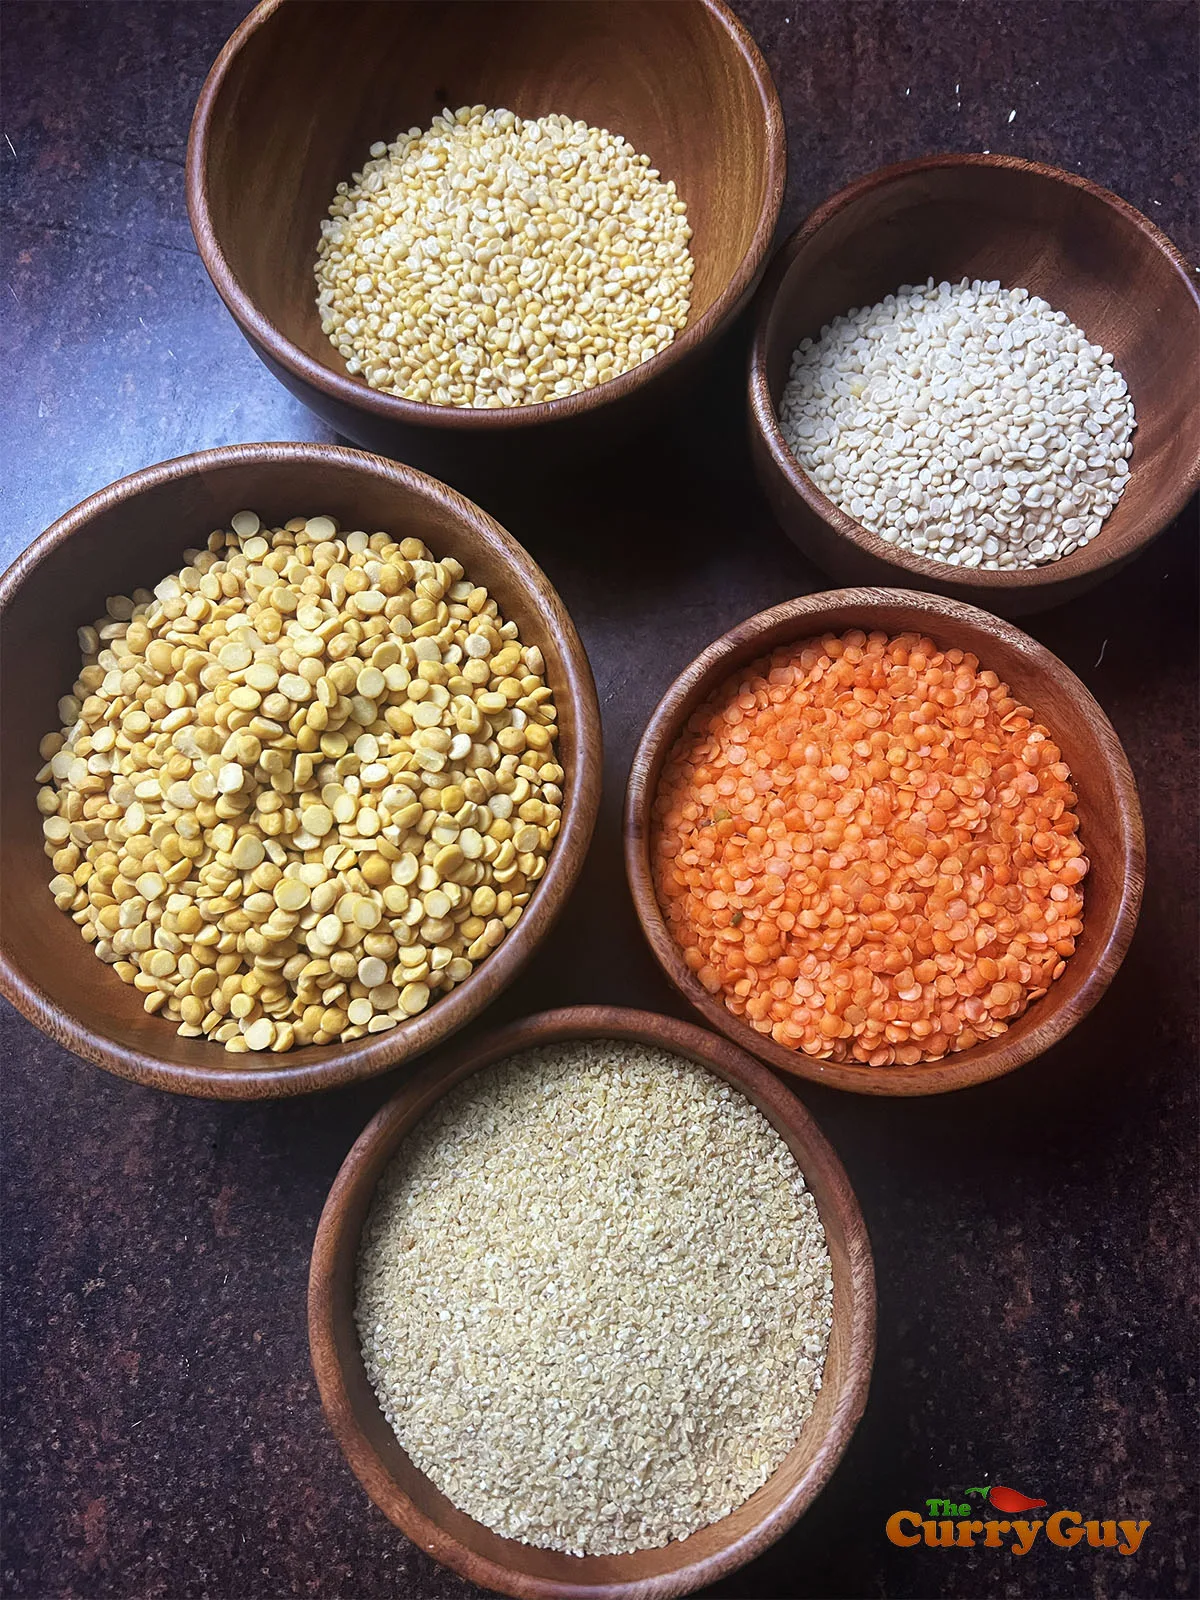 The lentils and wheat for the chicken haleem.